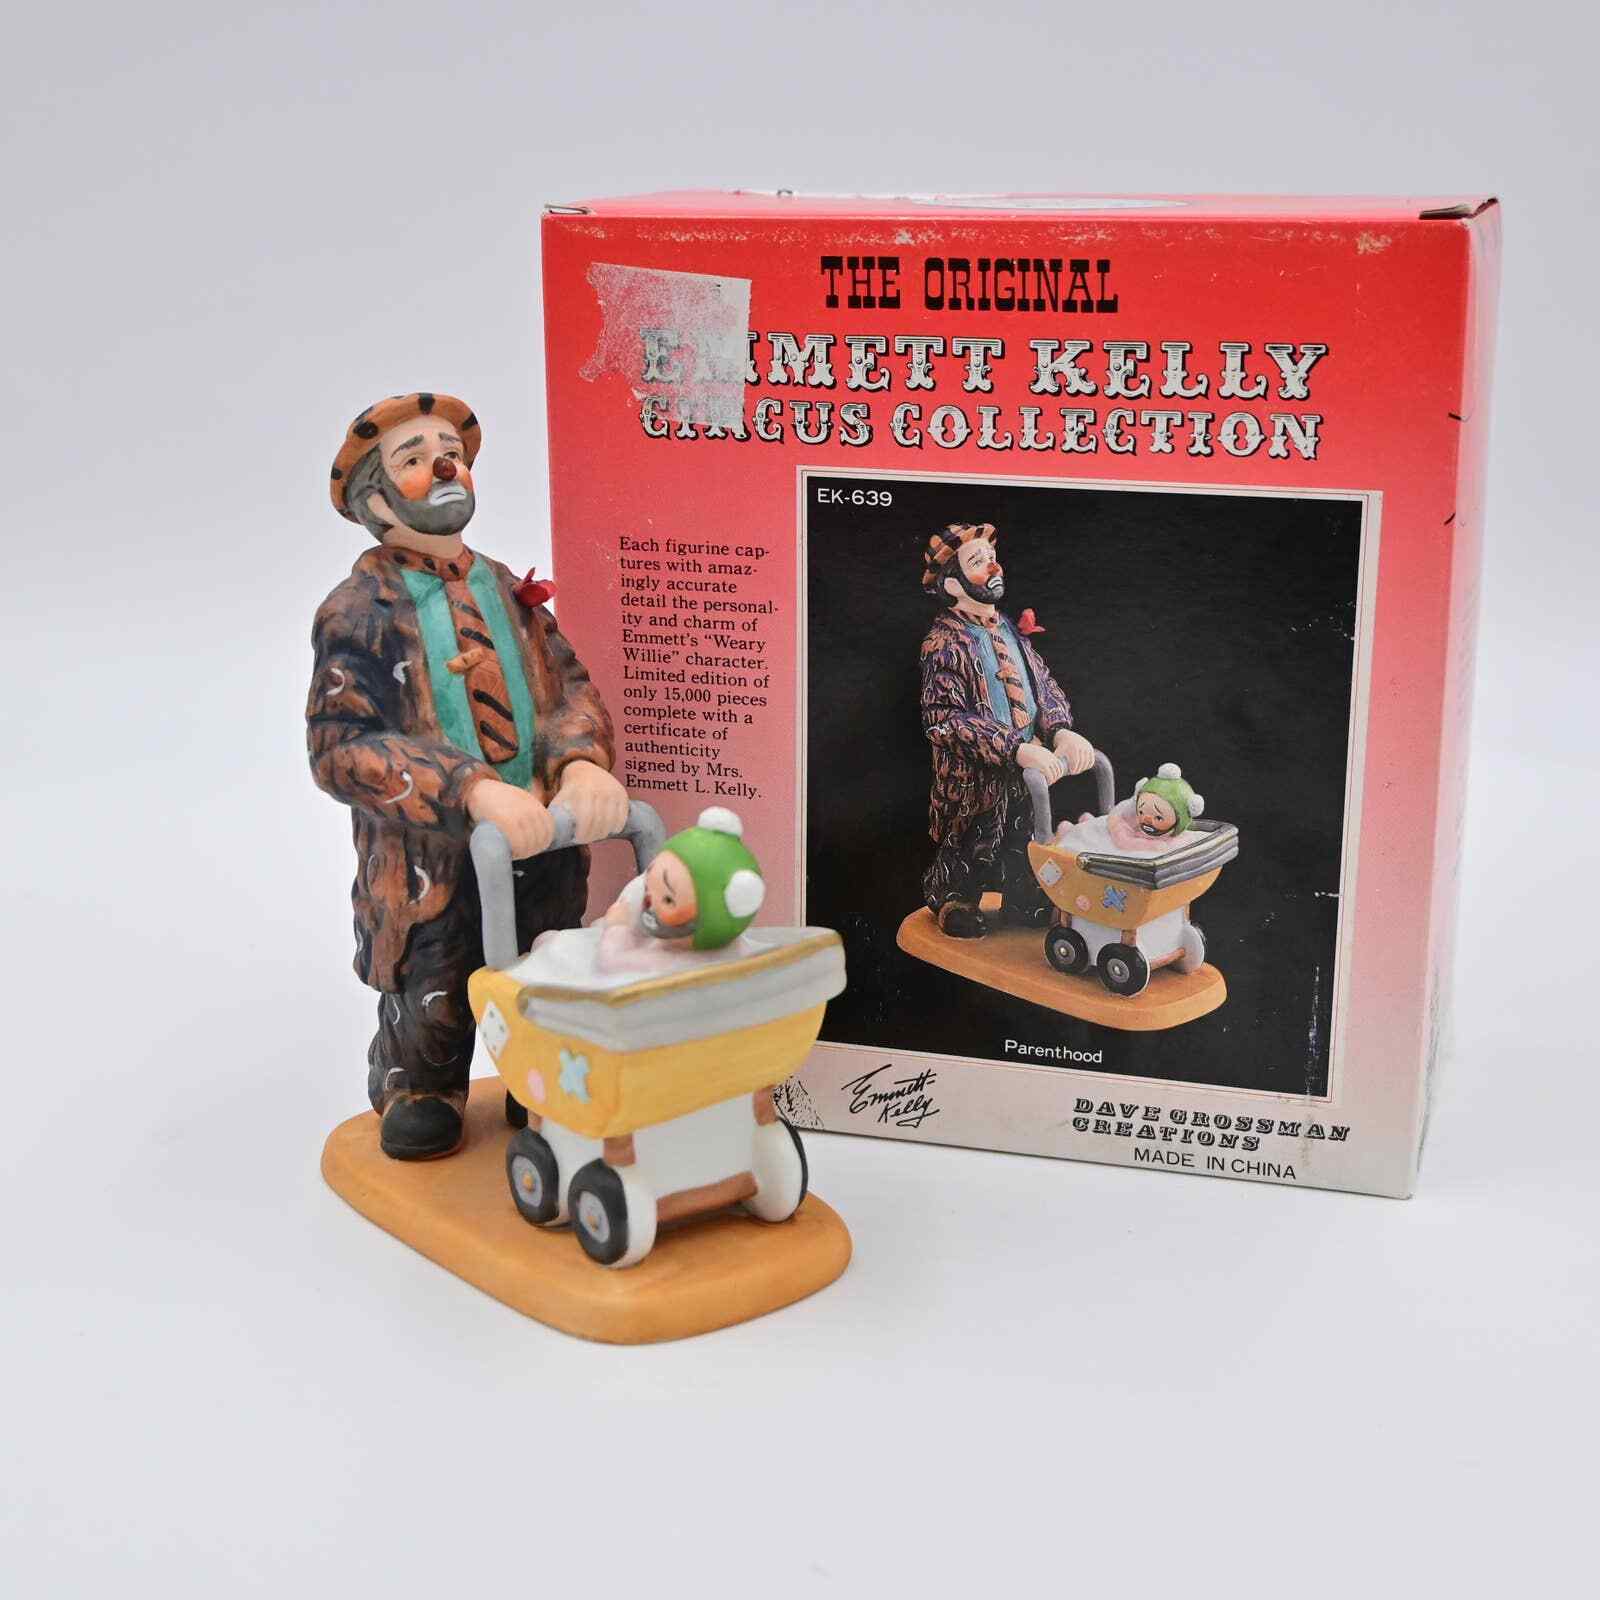 The Original Emmett Kelly Circus Collection Parenthood Figurine New In Box